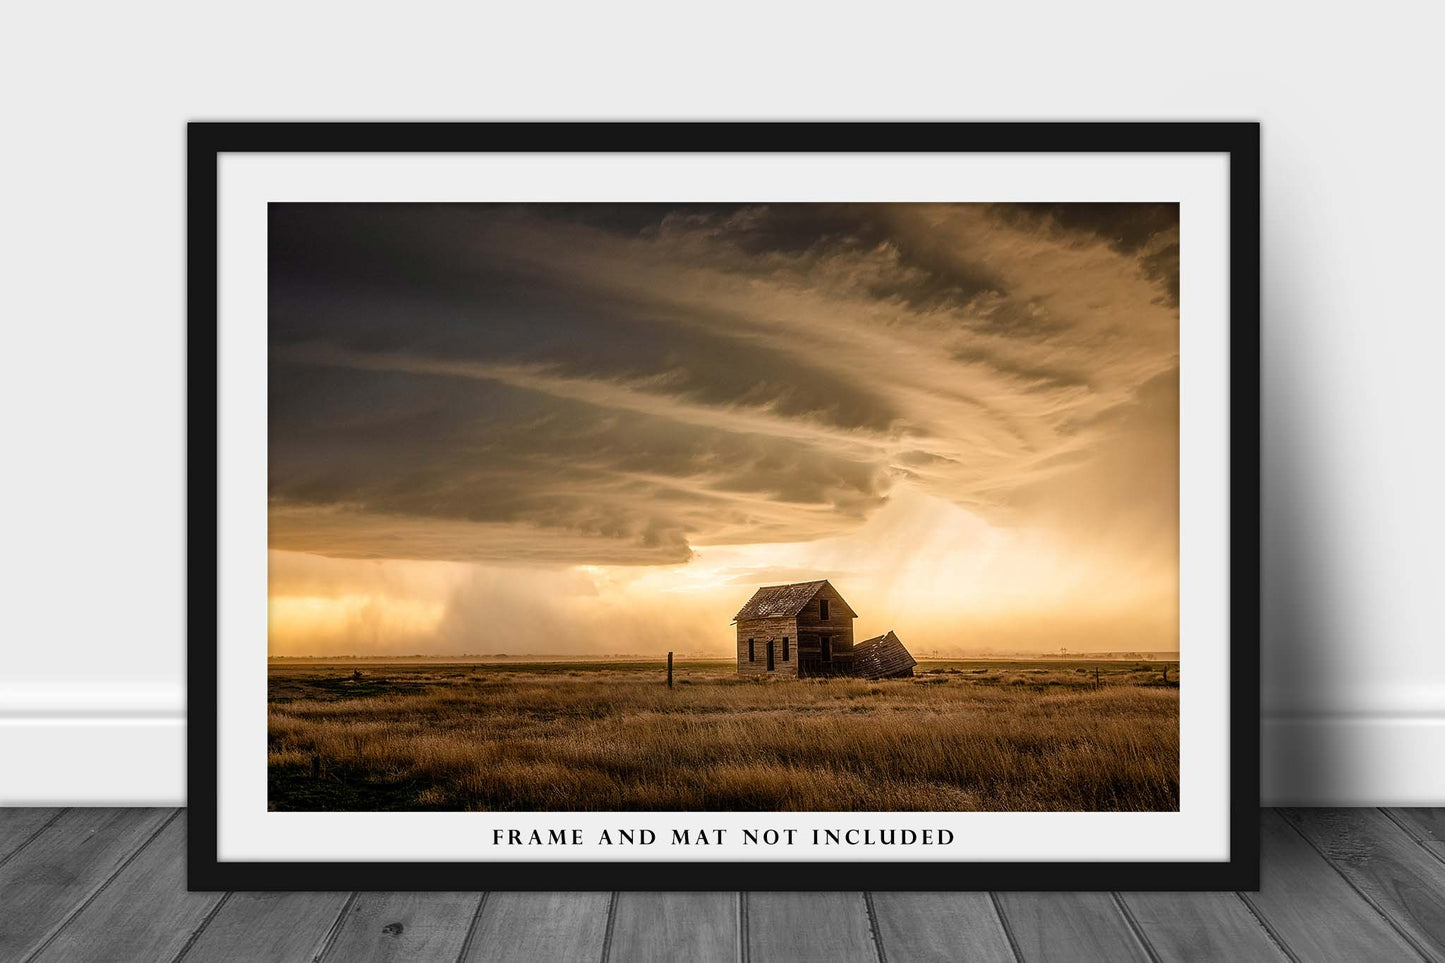 Storm Photography Print - Picture of Thunderstorm Approaching Abandoned House at Sunset in Colorado - Moody Country Farmhouse Wall Art Decor